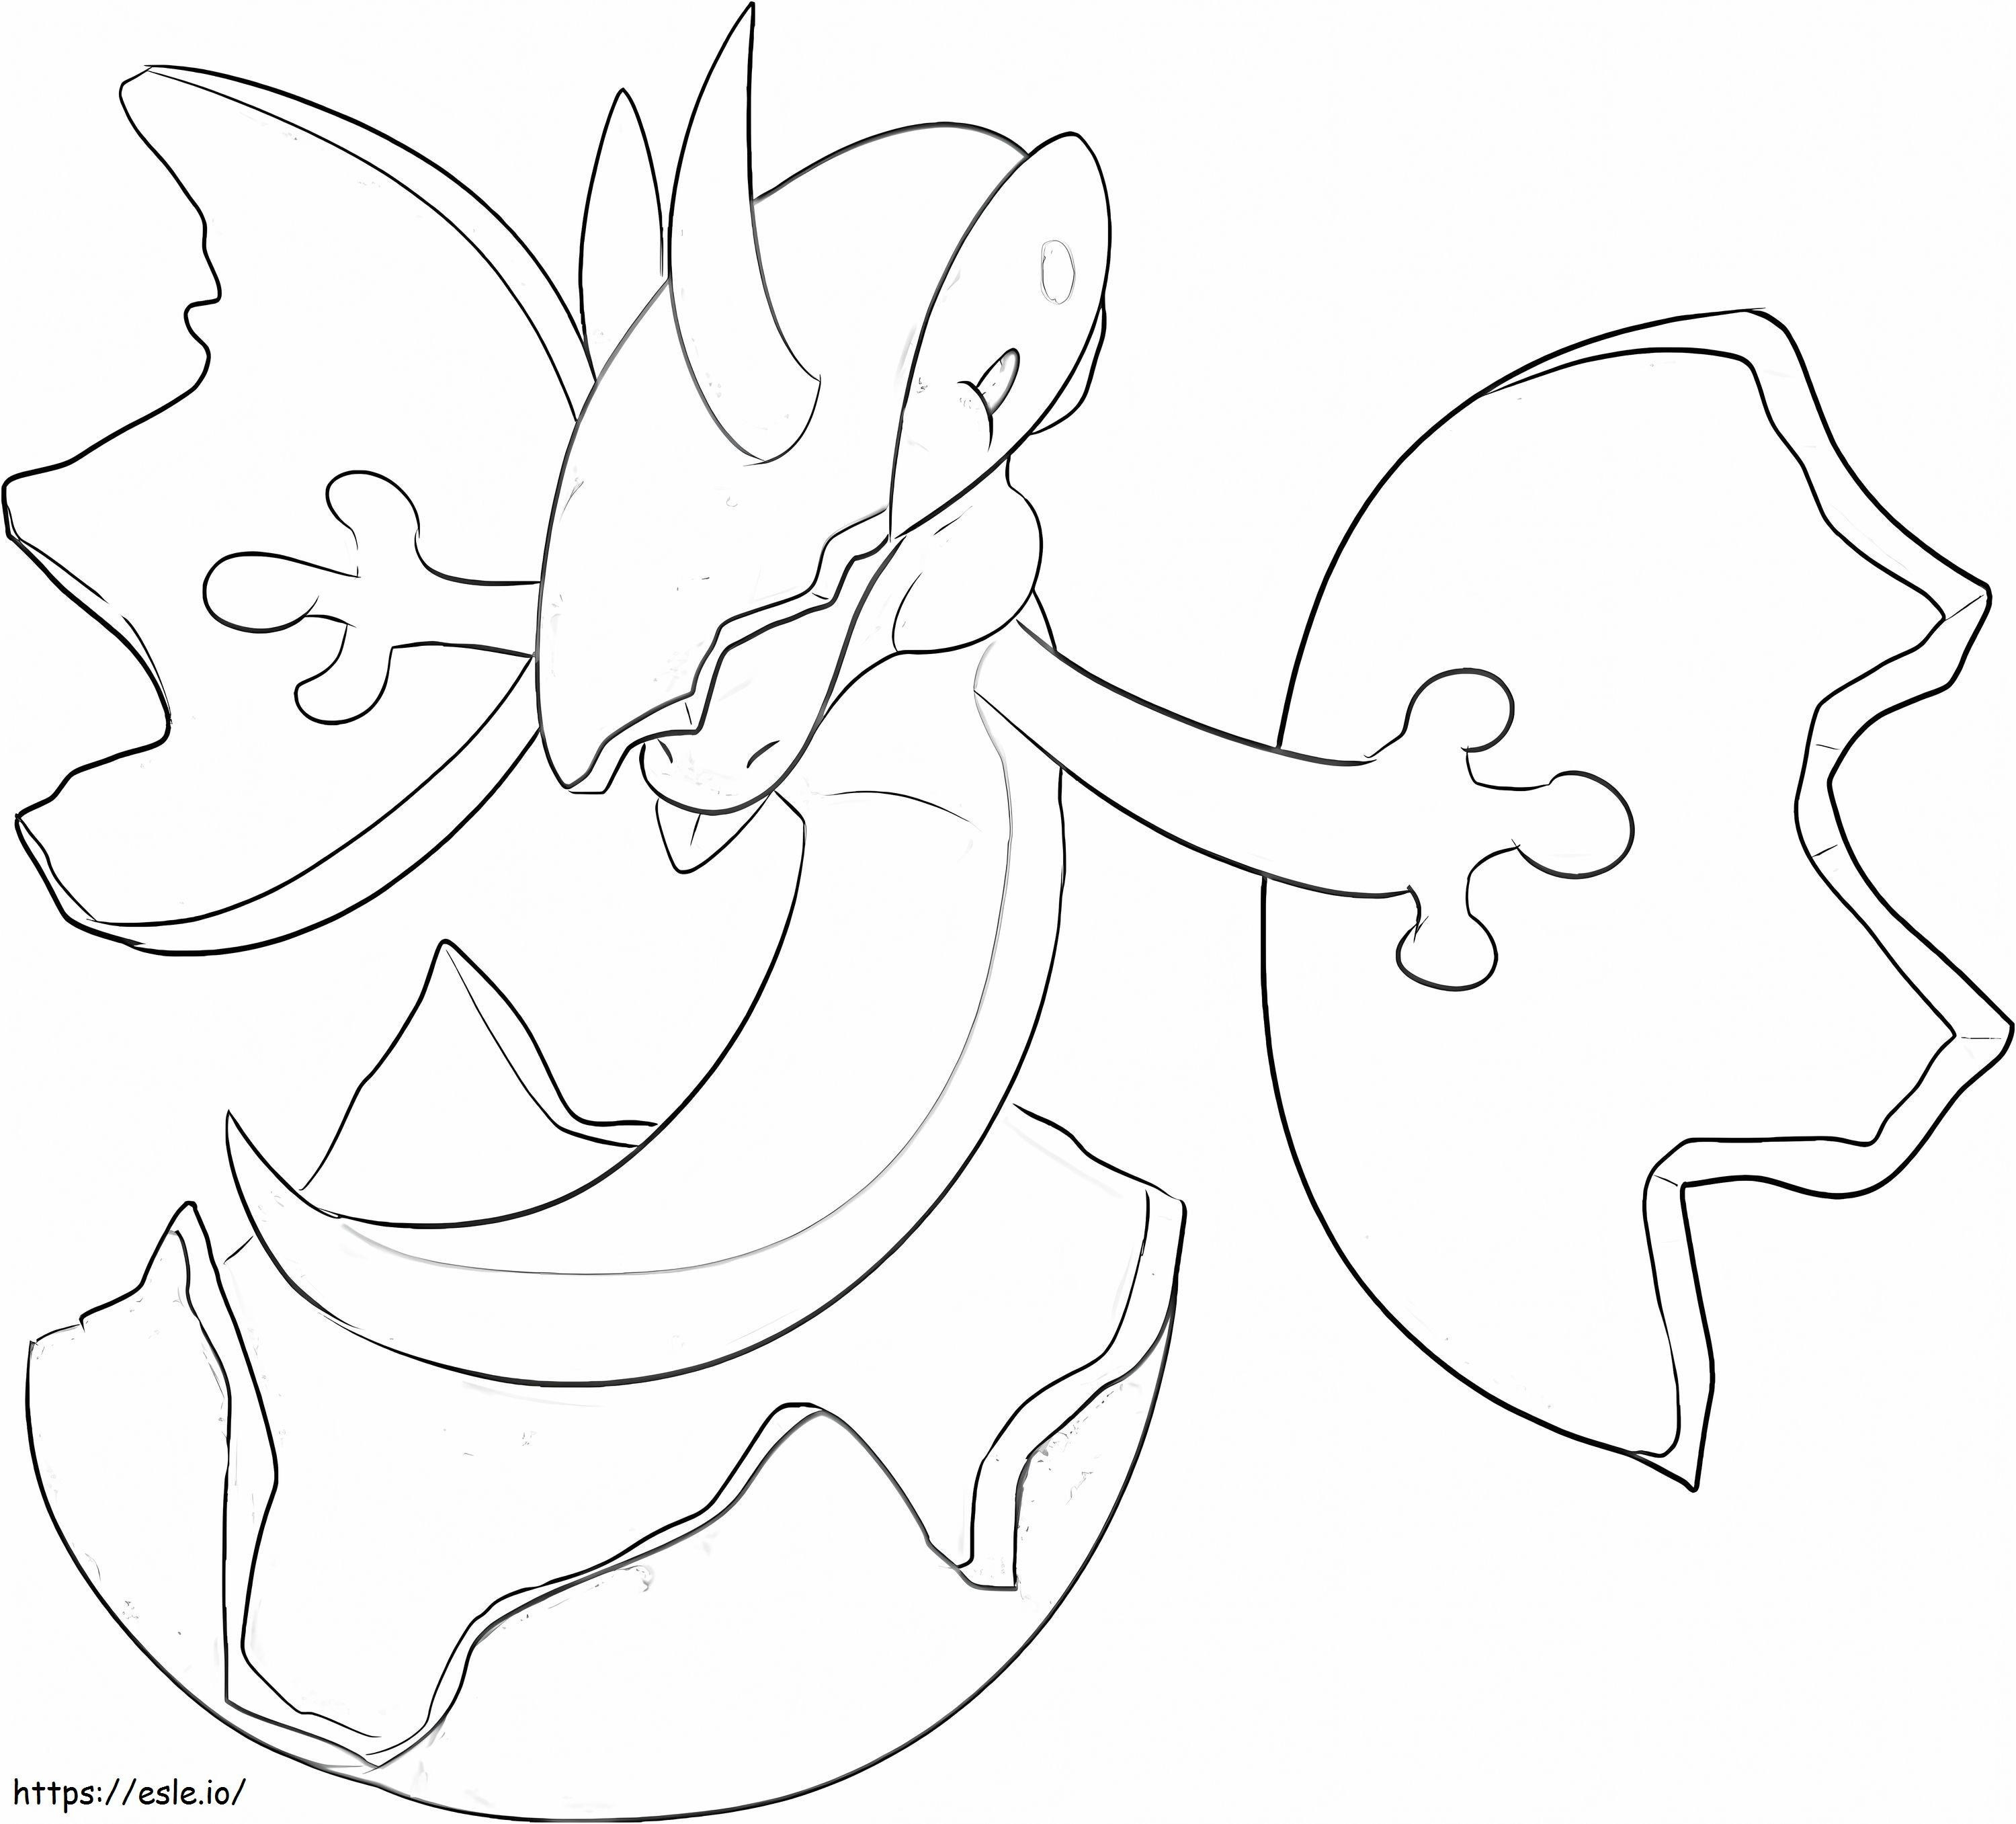 Flapple 6 coloring page